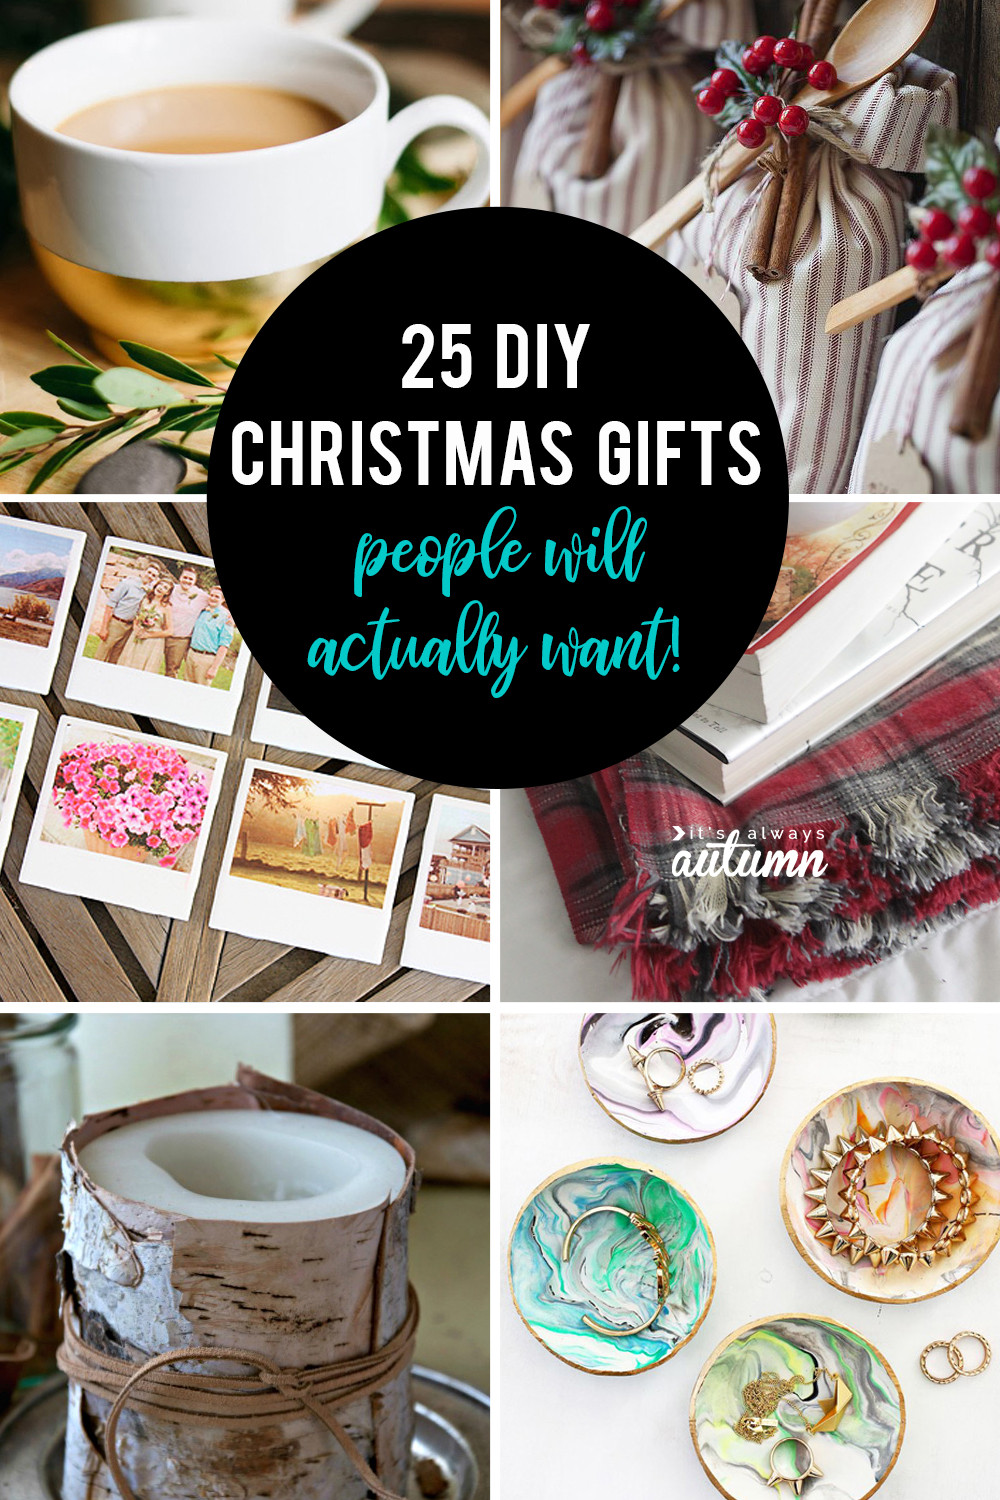 Pinterest Homemade Christmas Gifts
 25 amazing DIY ts people will actually want It s